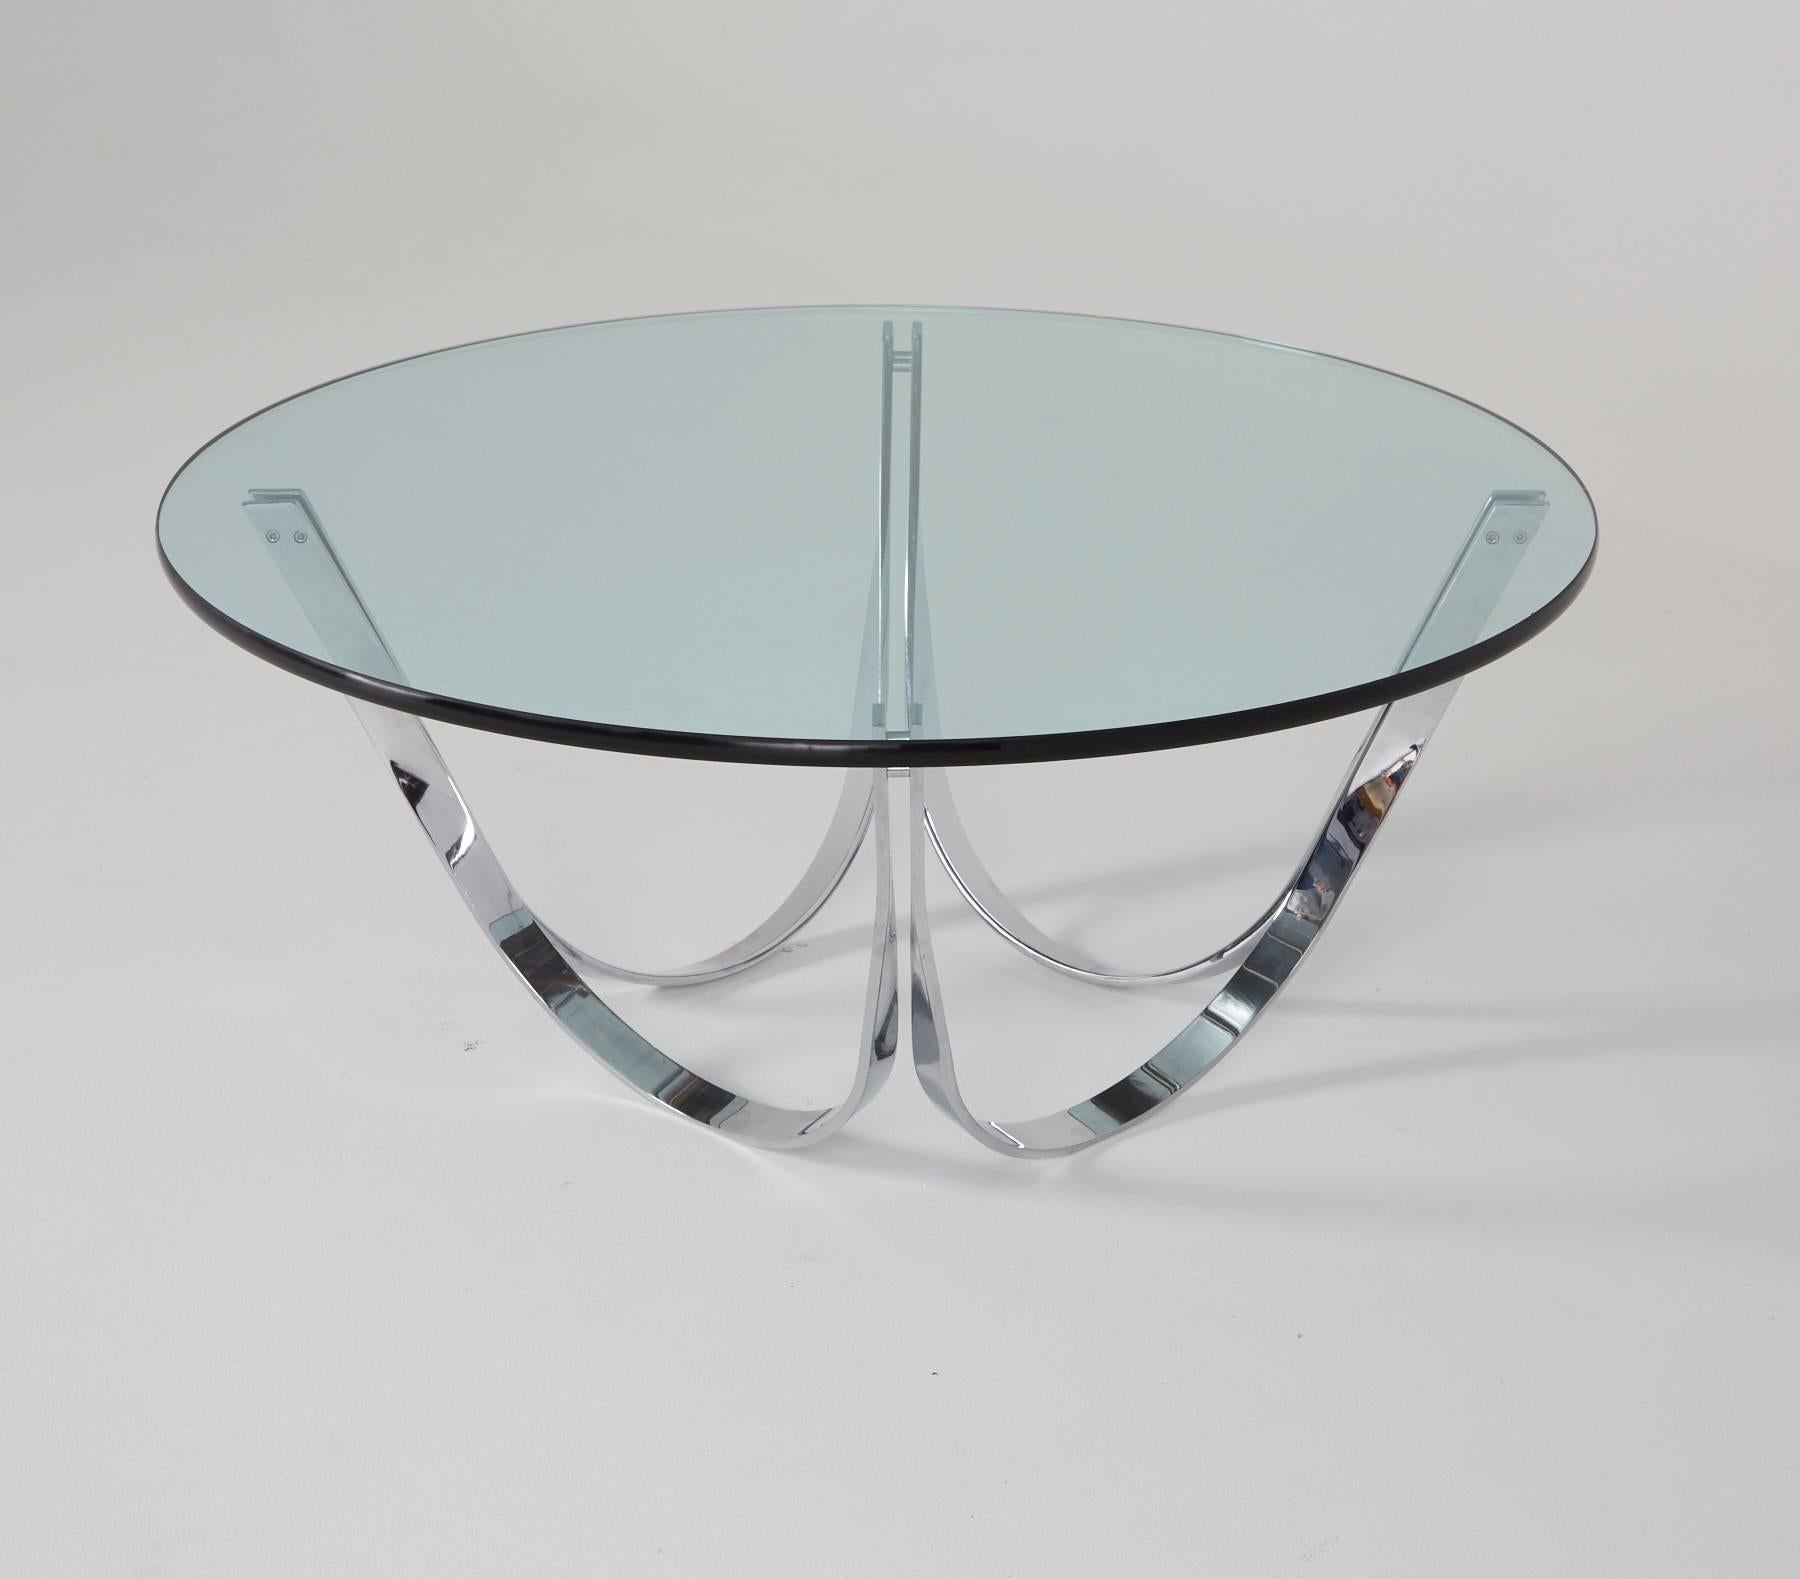 Post-Modern 1970s Sculptural Chrome Roger Sprunger Style Coffee Table by Tri-Mark